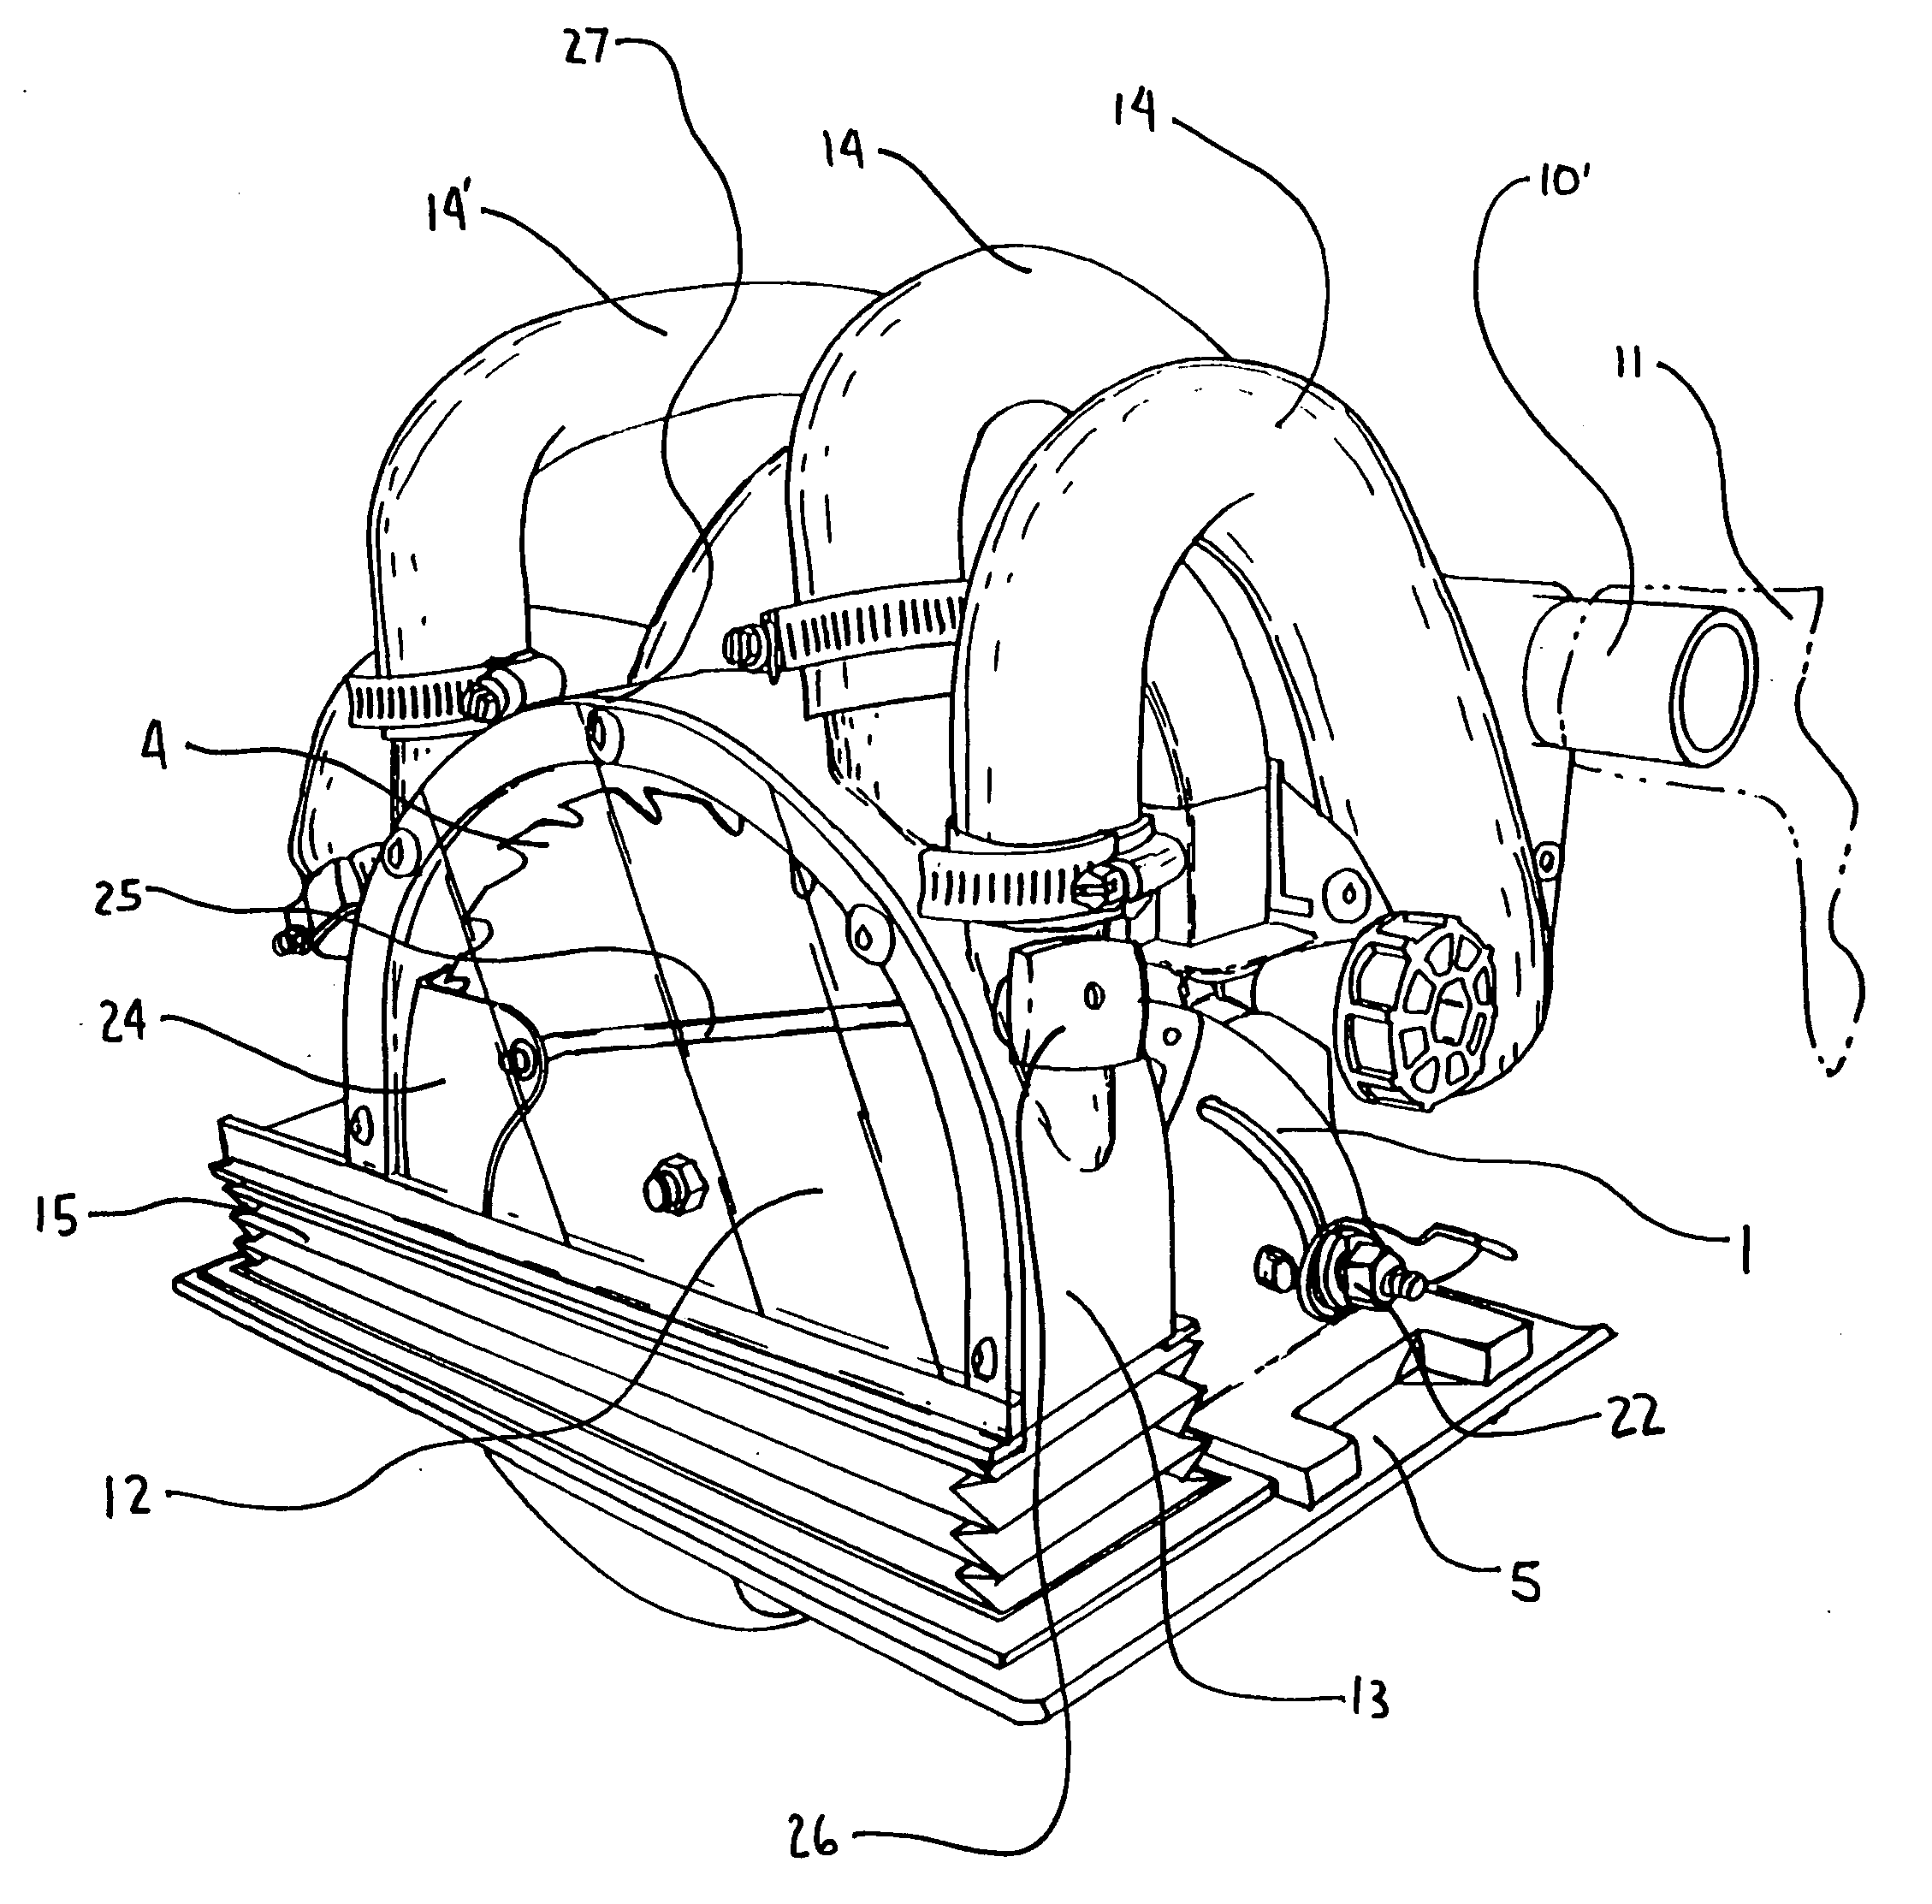 Self-contained vacuum saw